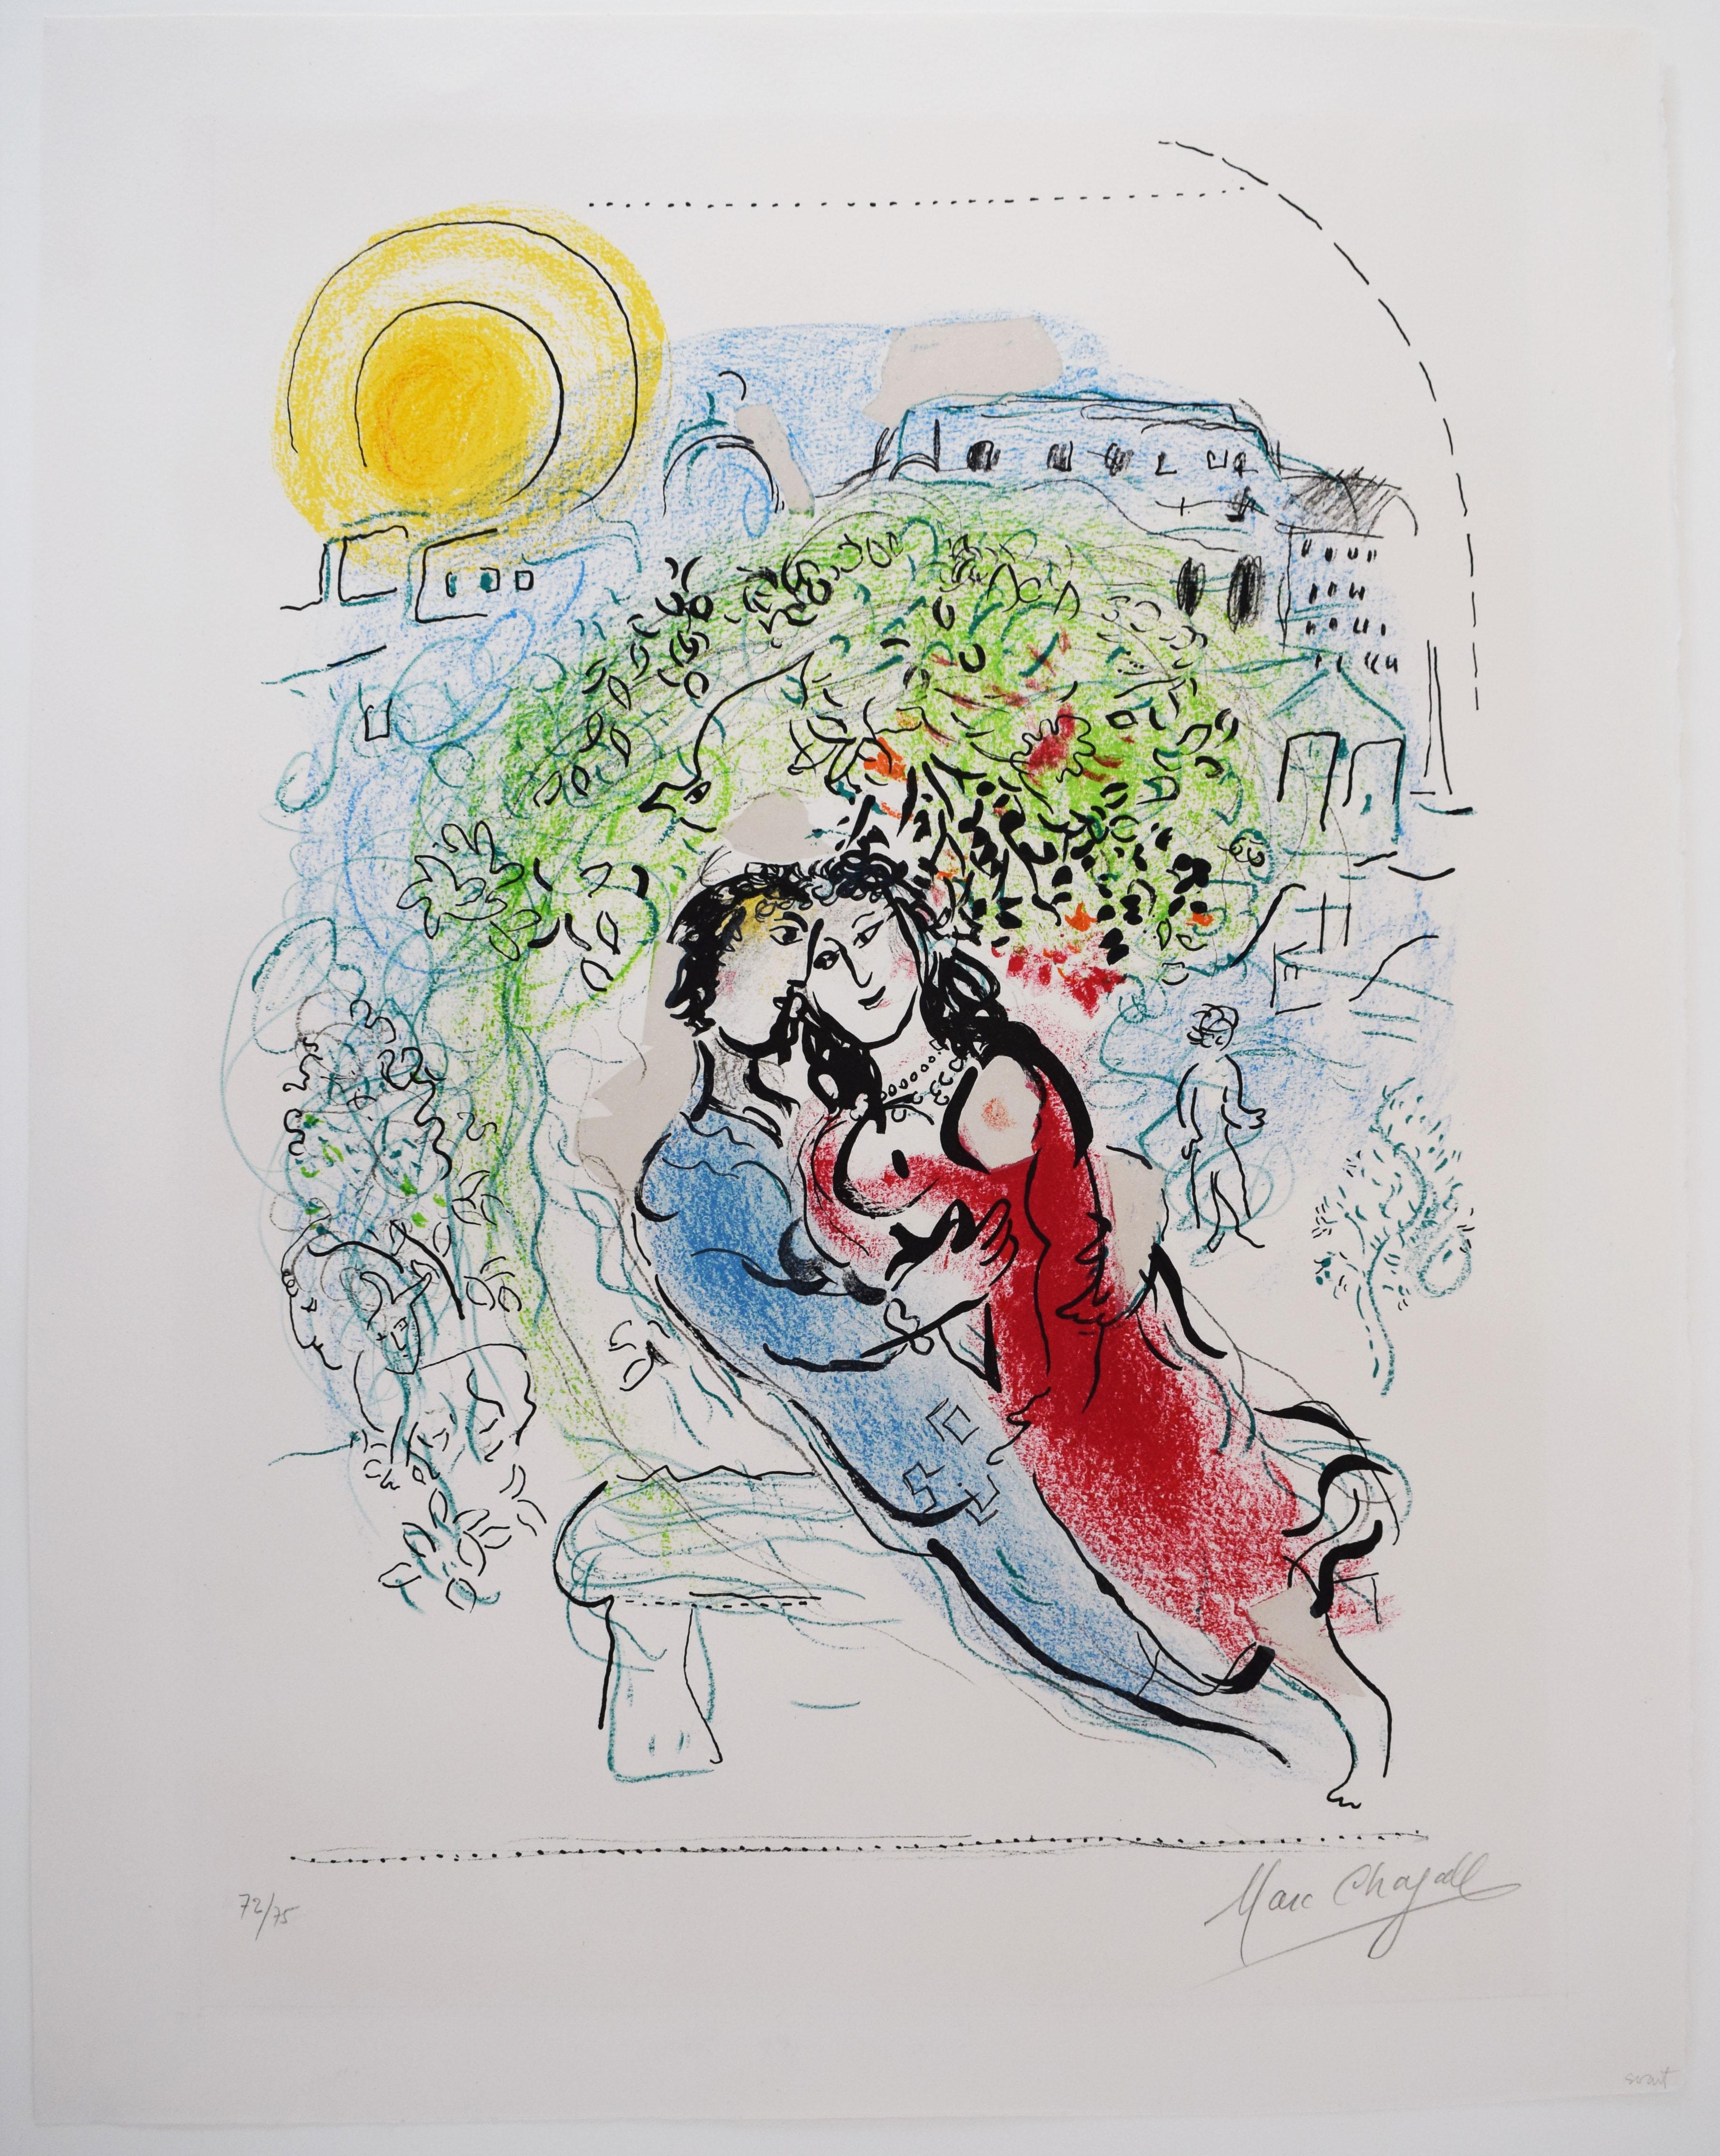 The Paris Square - French Russian Couple Lovers Parisian Street - Print by Marc Chagall